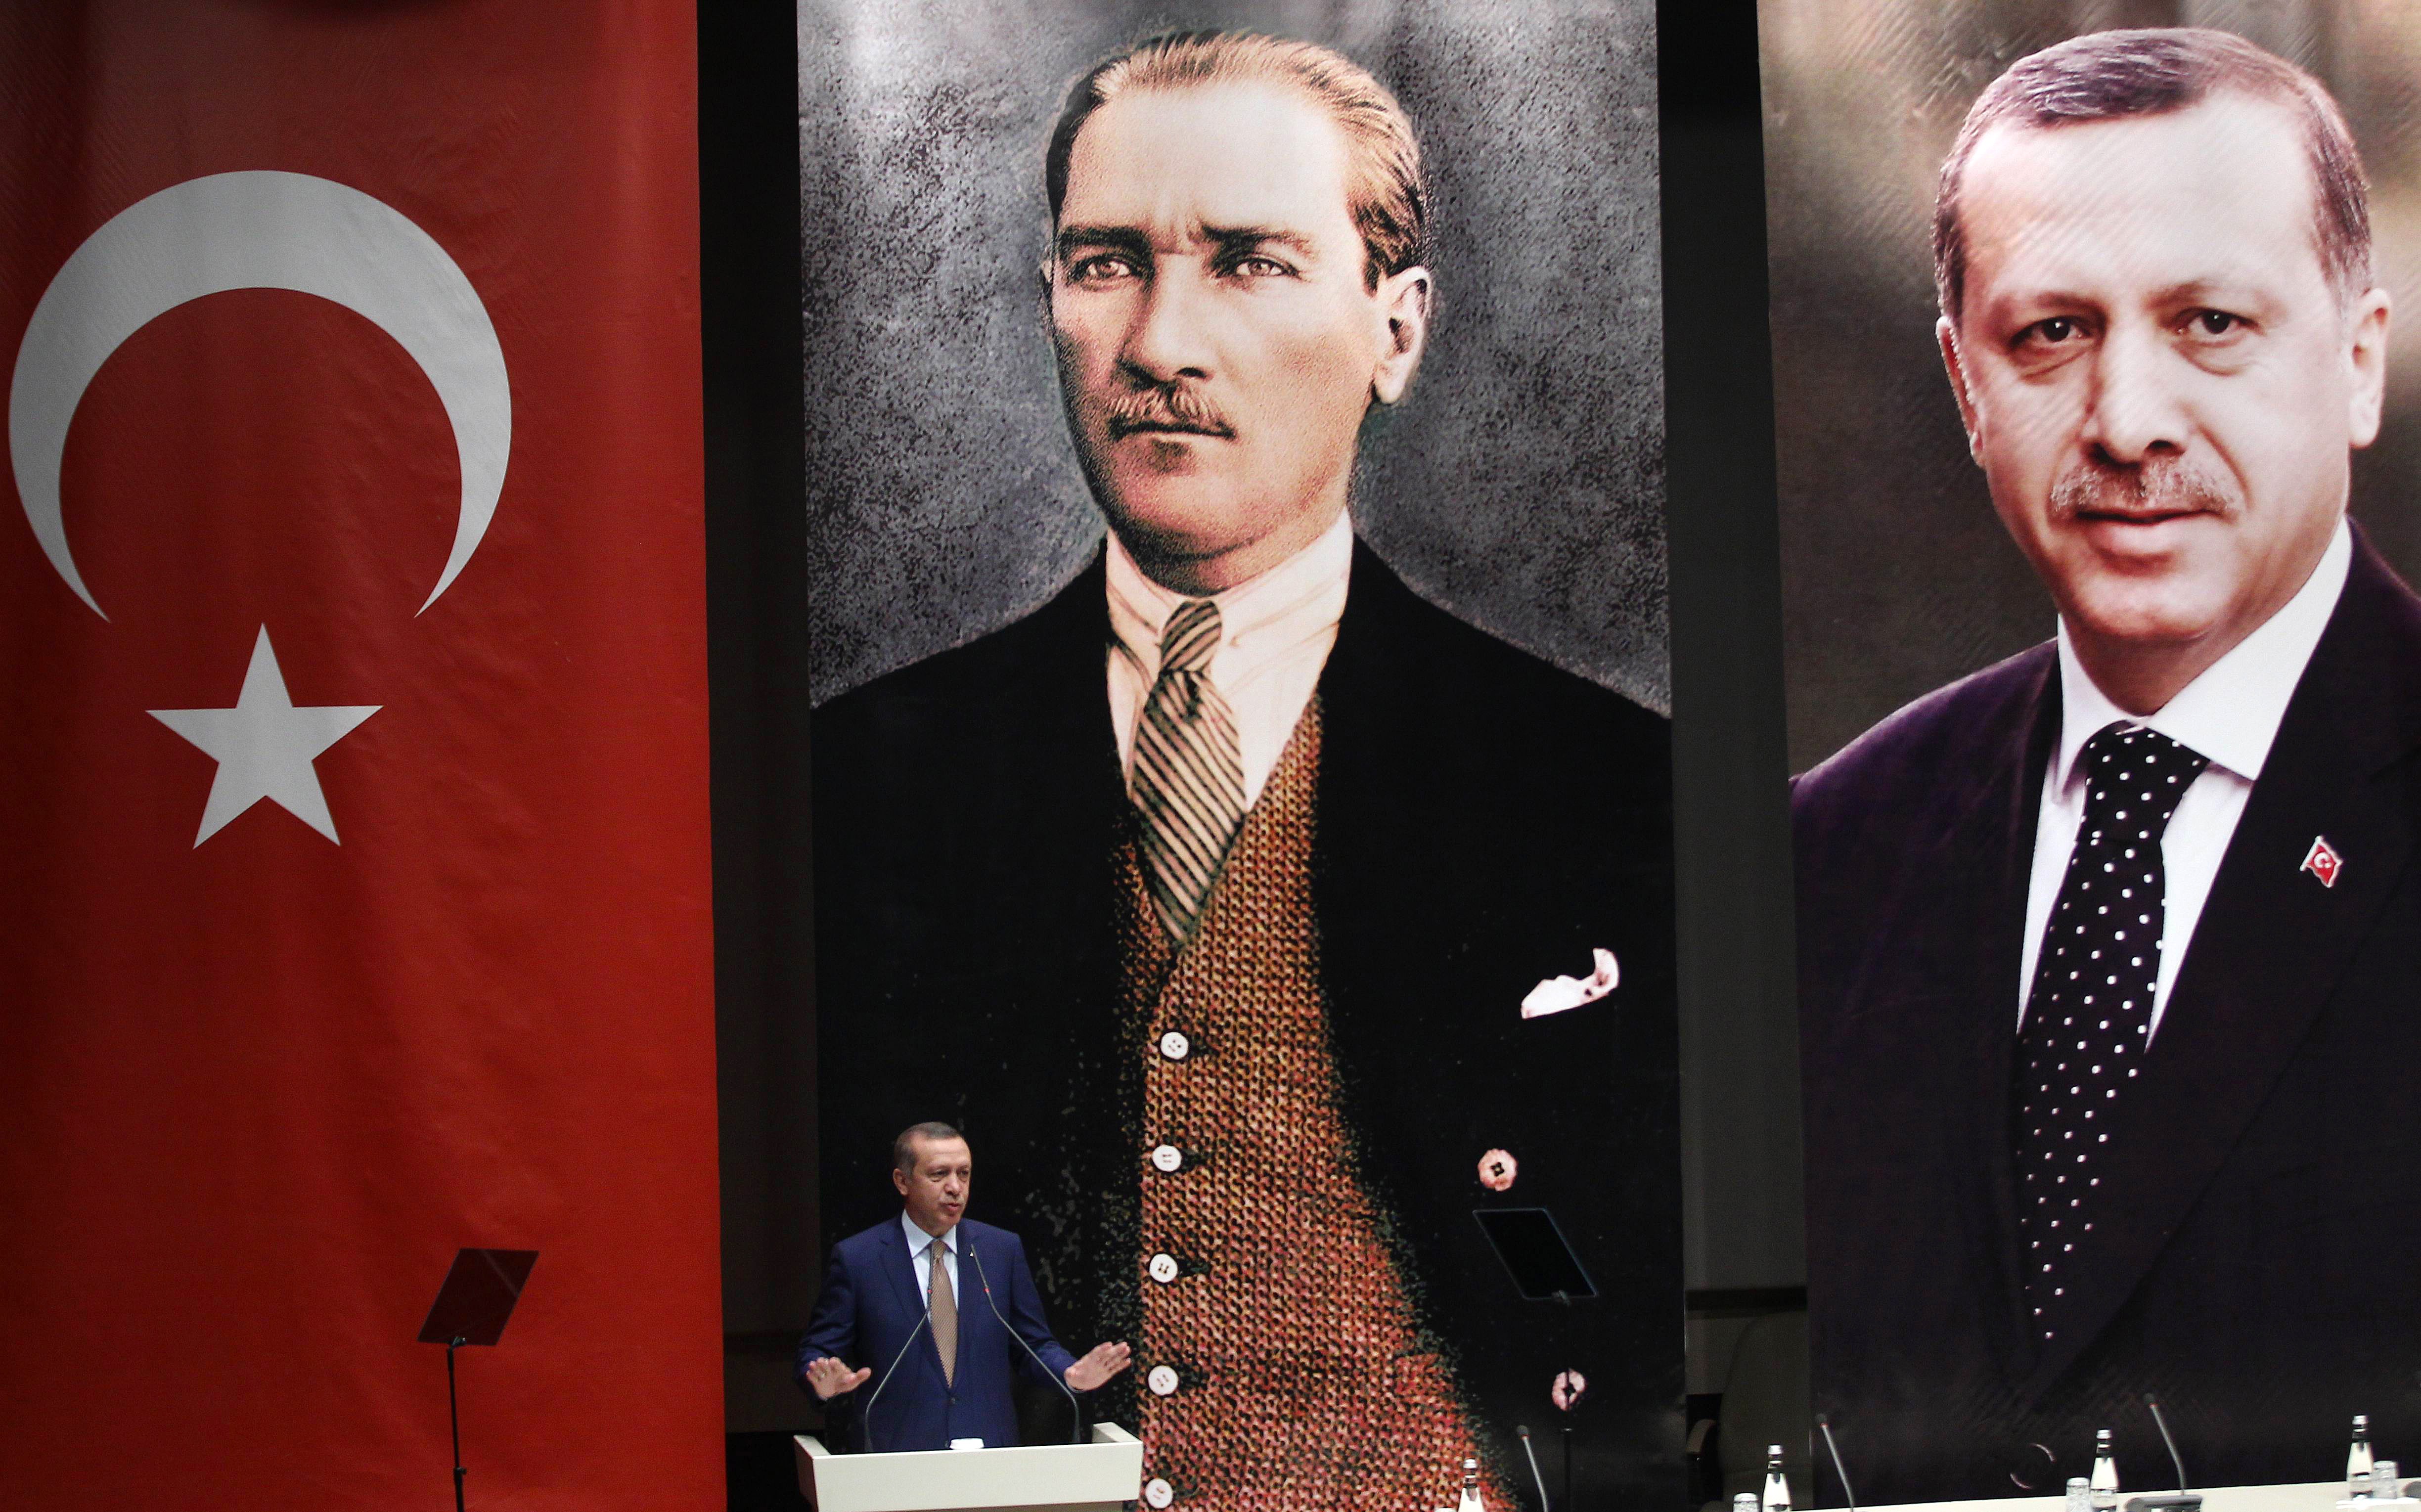 Turkey's Prime Minister Recep Tayyip Erdogan addresses members of his ruling AK Party, as he stands in front of portraits of himself (R) and Mustafa Kemal Ataturk, the founder of modern Turkey, during a meeting at his party headquarters in Ankara on May 23, 2014. AFP PHOTO / ADEM ALTAN        (Photo credit should read ADEM ALTAN/AFP/Getty Images)